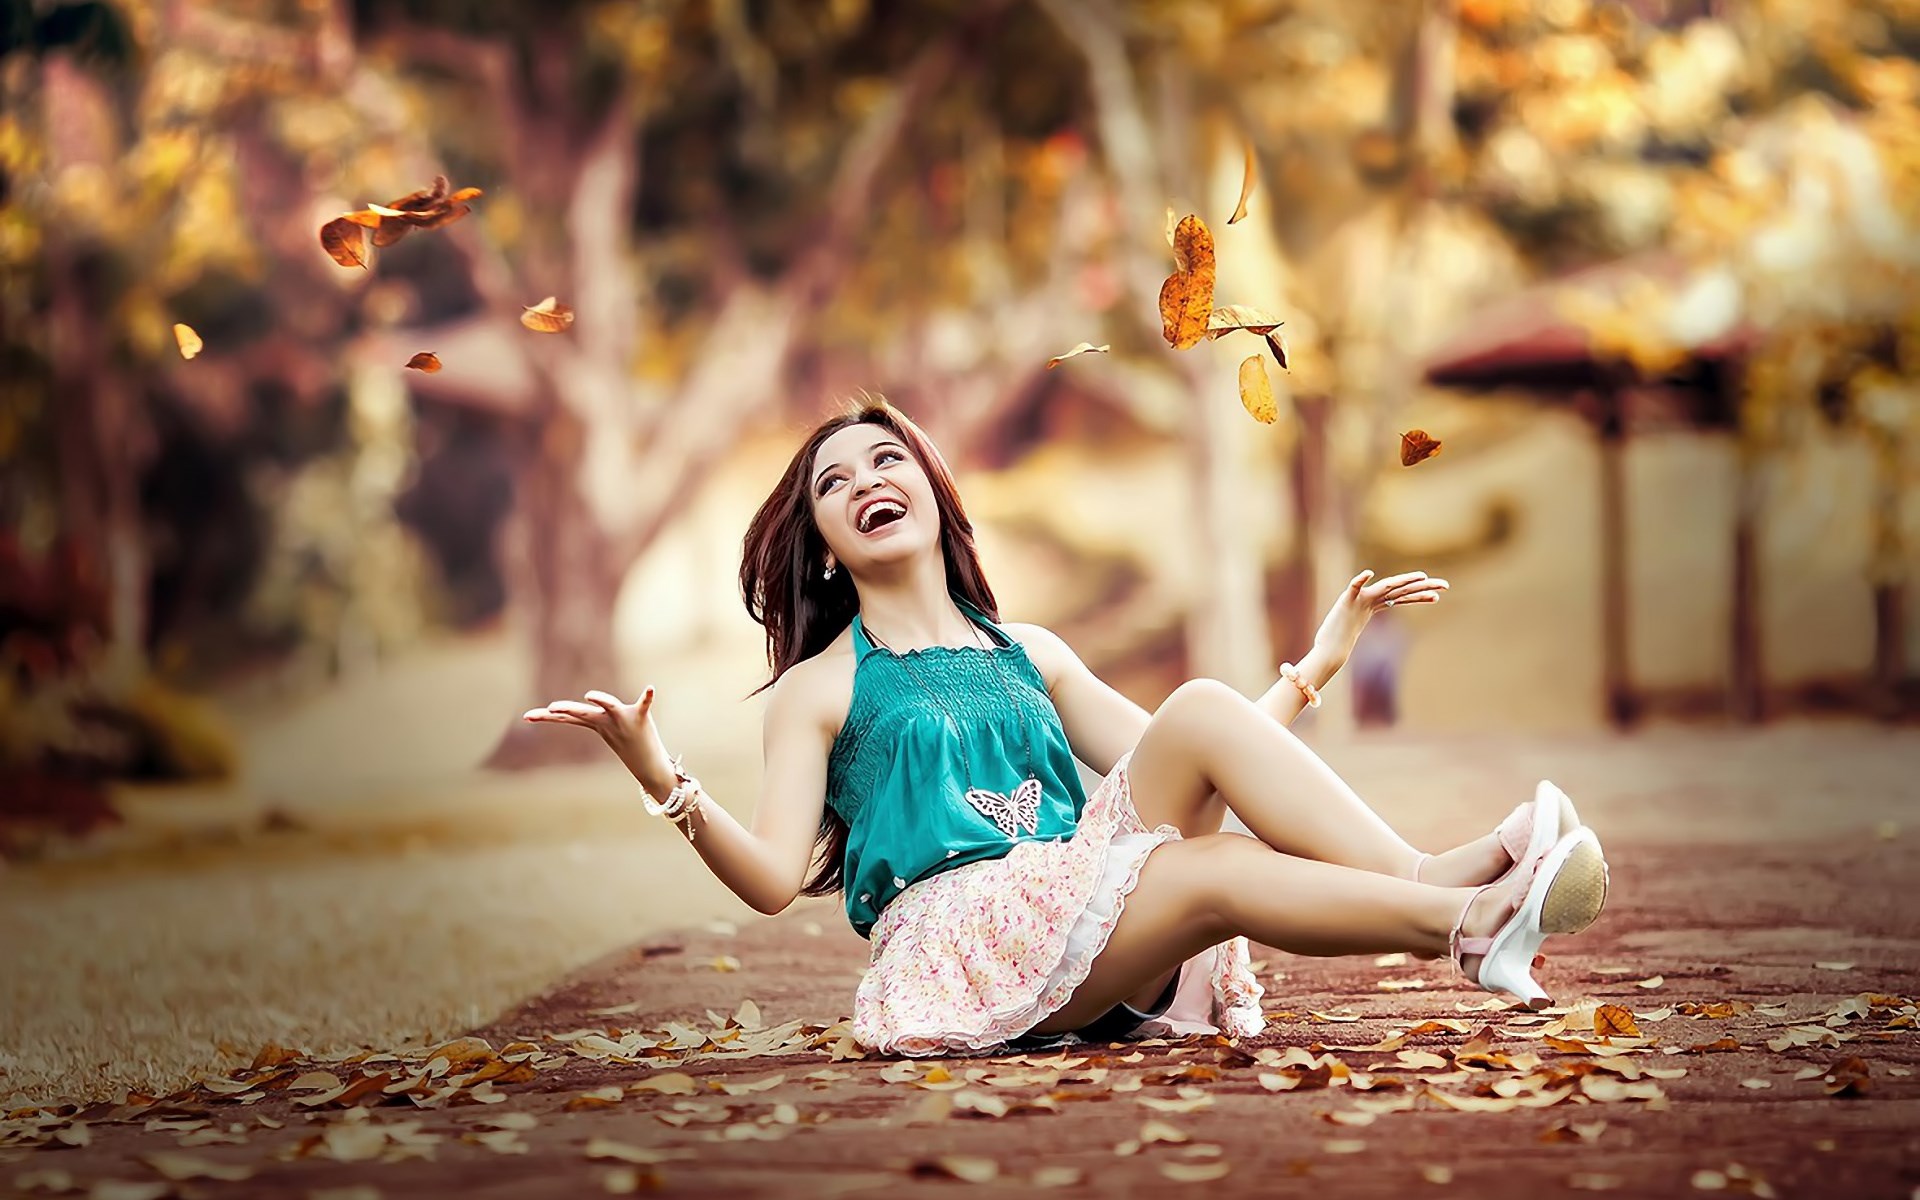 mood card wallpaper,people in nature,beauty,leaf,photography,fun